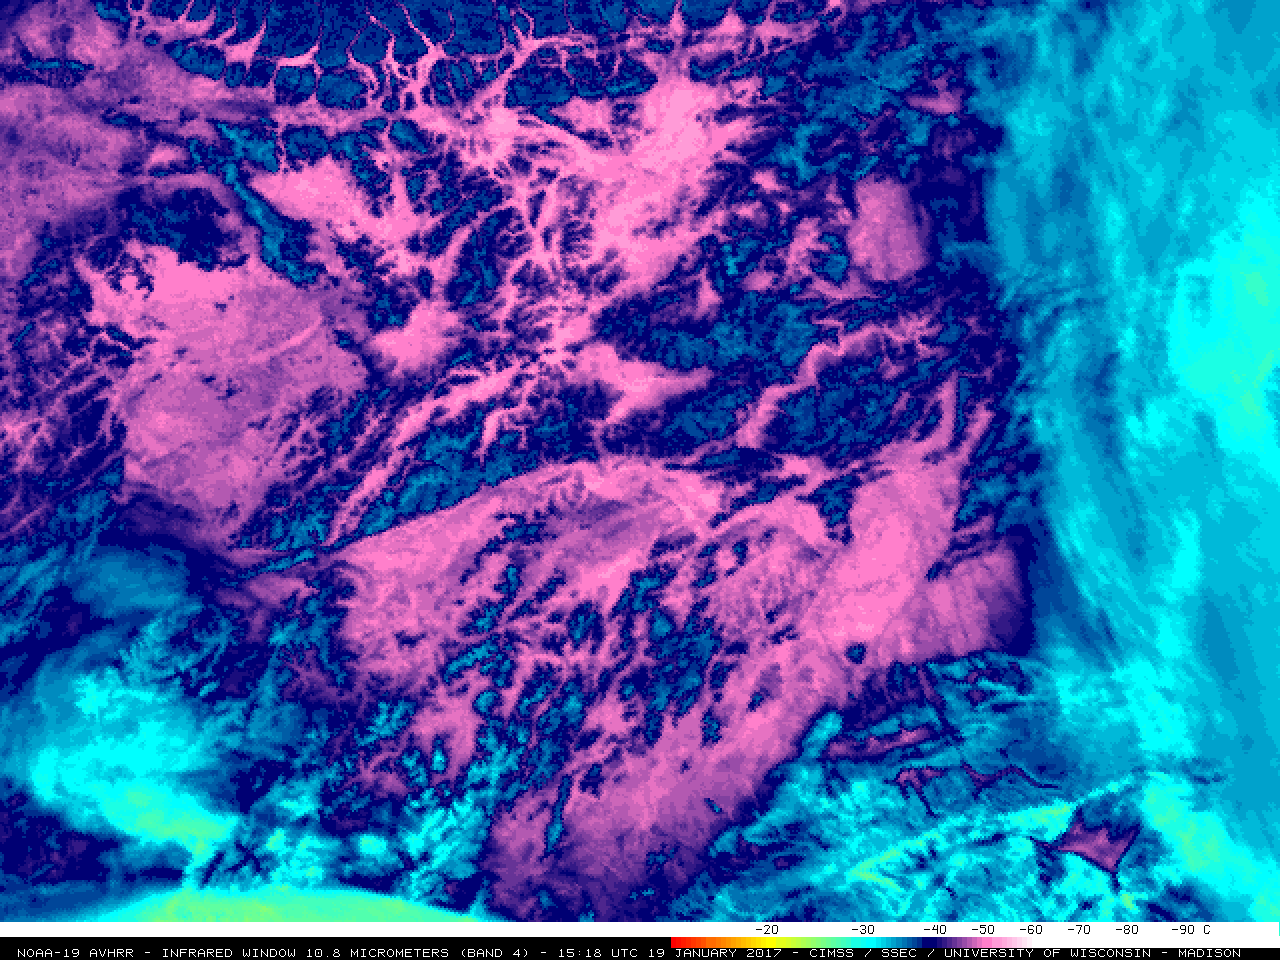 NOAA-19 AVHRR Infrared Window (10.8 µm) images centered on Tanana (PATA), with surface air temperatures and corresponding station identifications [click to enlarge]